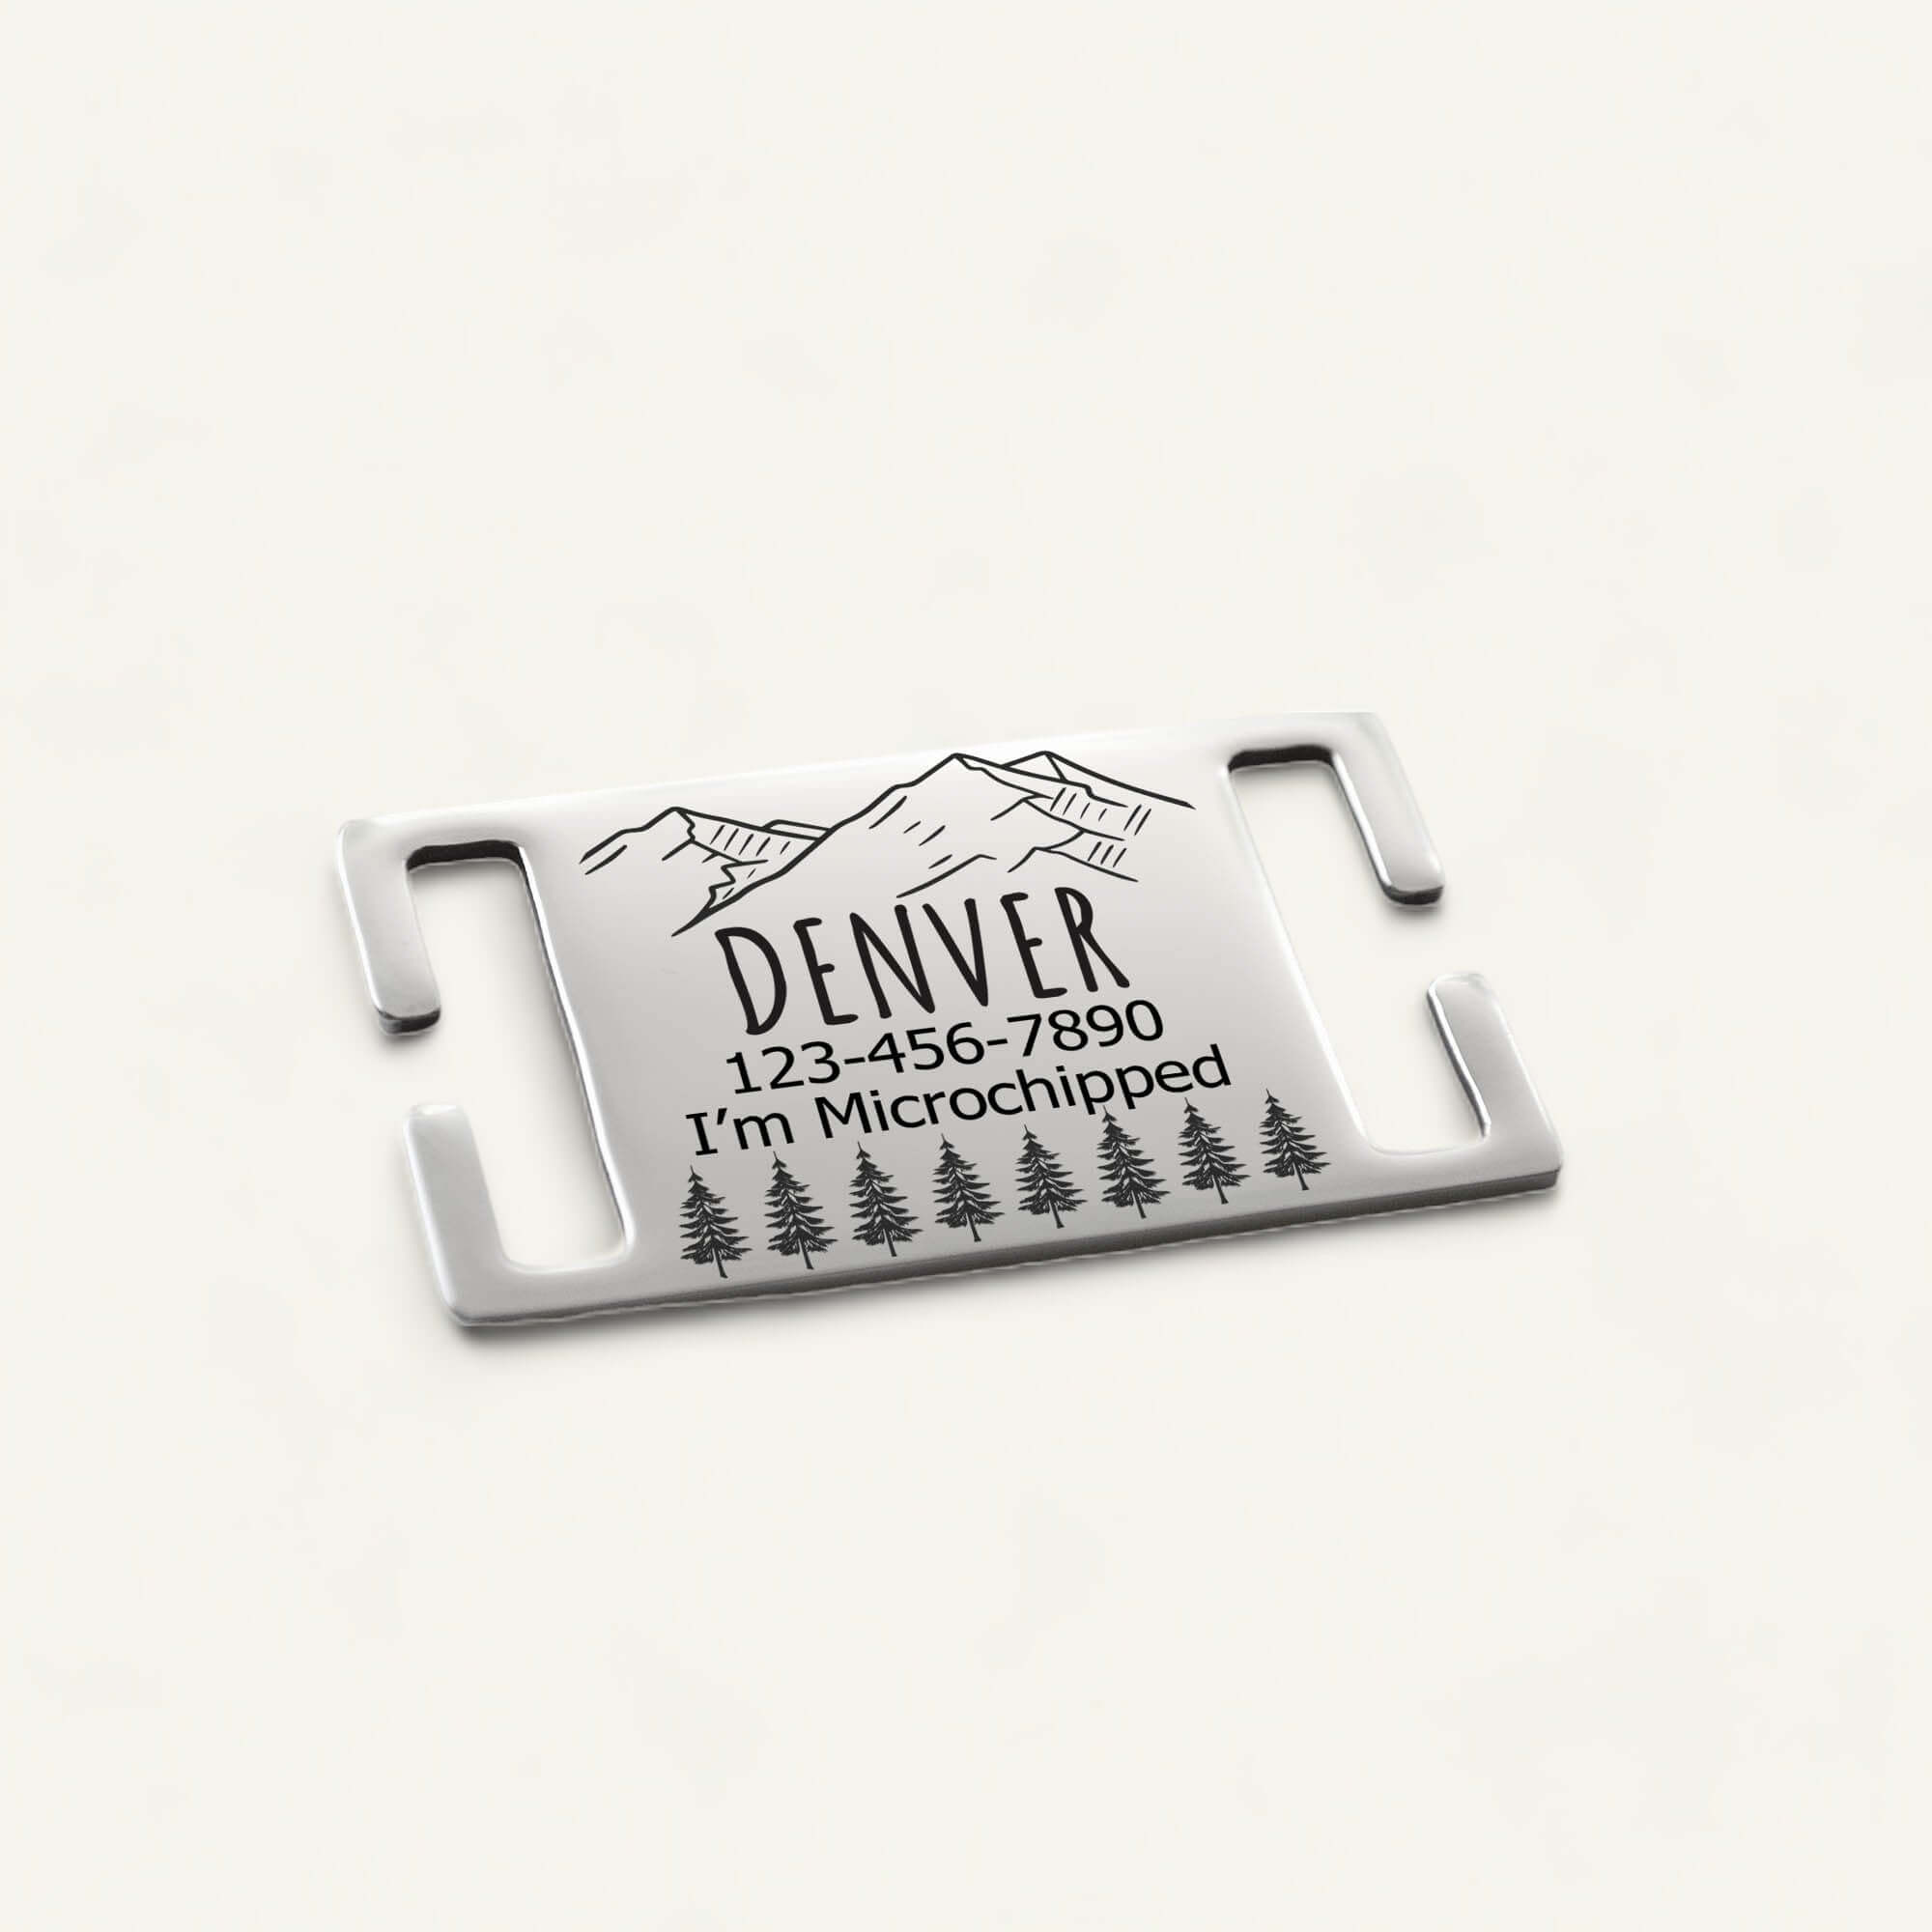 Slide-On Dog Tag Silver with Mountains Theme 